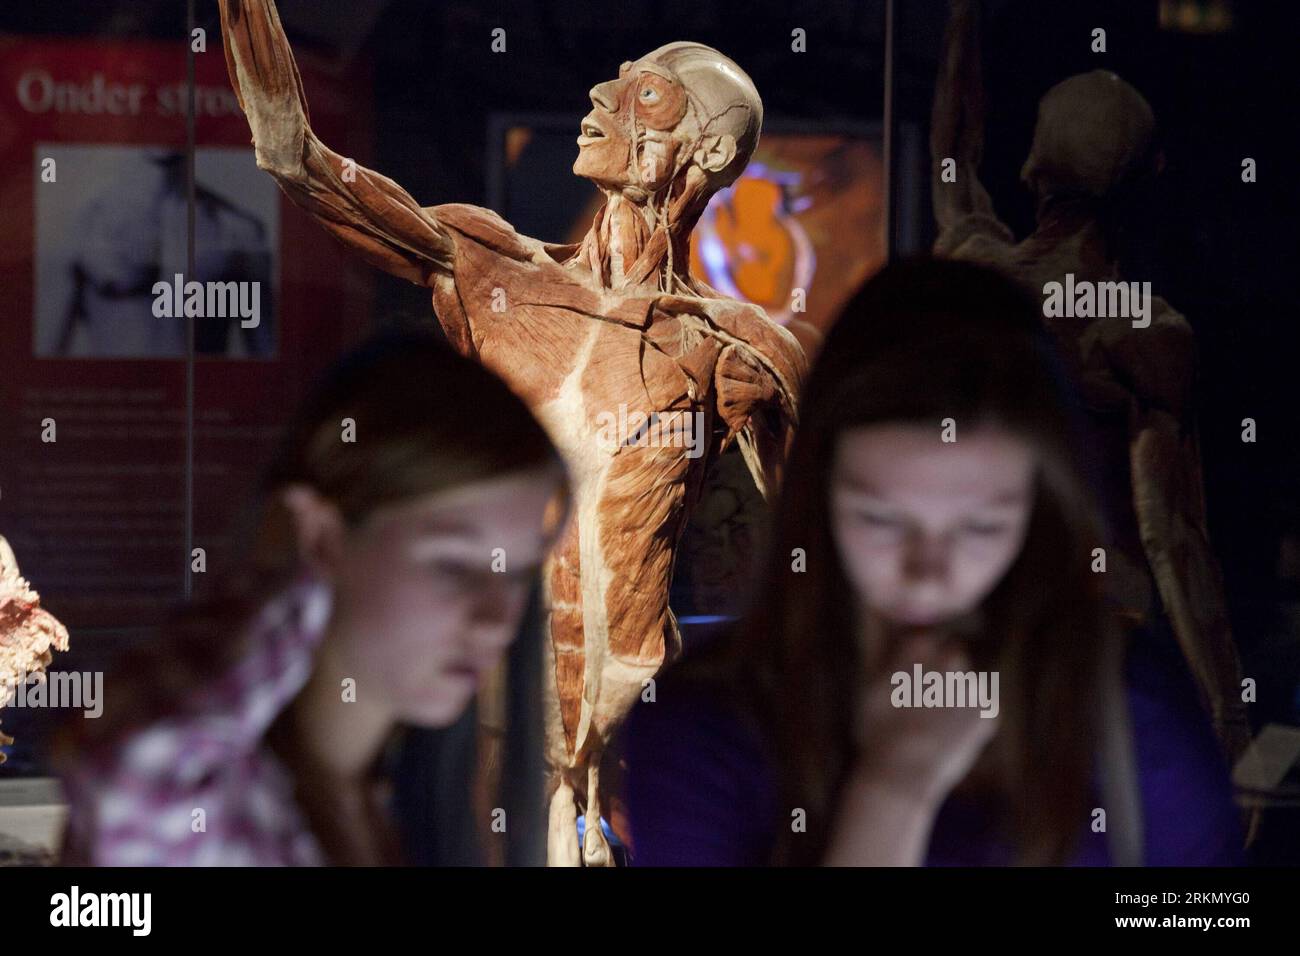 Bildnummer: 56874529  Datum: 12.01.2012  Copyright: imago/Xinhua (120112)-- AMSTERDAM, Jan. 12, 2012 (Xinhua) -- Visitors watch the bodies at the Body Worlds exhibition in Amsterdam, the Netherlands, on Jan. 12, 2012. The original anatomical exhibition, displaying authentic human bodies of donors, opened here Thuresday. (Xinhua/Rich Nederstigt) NETHERLANDS-AMSTERDAM-BODY SPECIMEN-EXHIBITON PUBLICATIONxNOTxINxCHN Kultur Ausstellung Plastination Körperwelten premiumd xns x0x 2012 quer      56874529 Date 12 01 2012 Copyright Imago XINHUA  Amsterdam Jan 12 2012 XINHUA Visitors Watch The Bodies AT Stock Photo